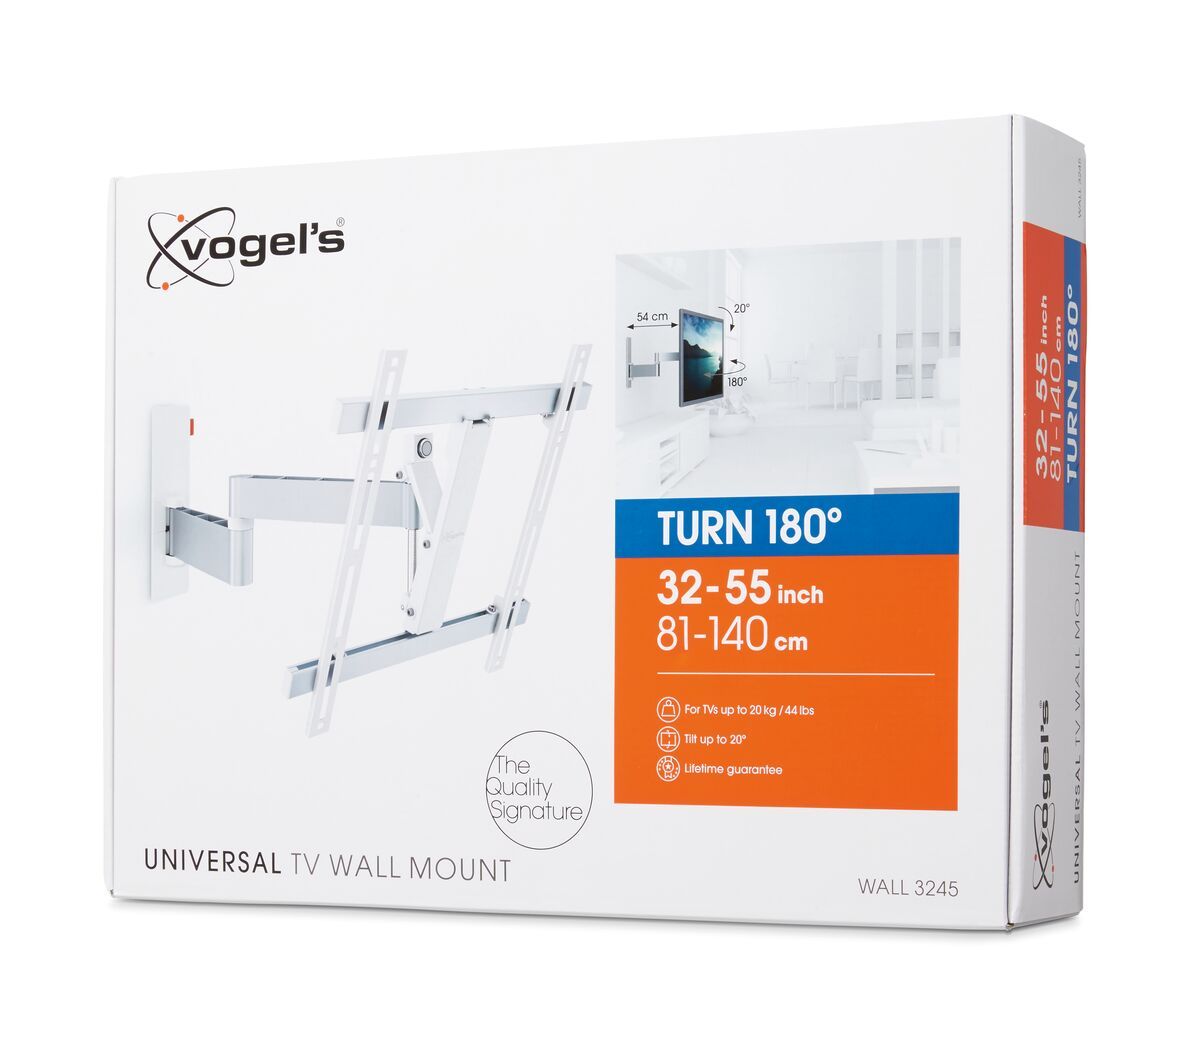 Vogel's WALL 3245 Full-Motion TV Wall Mount (white) - Suitable for 32 up to 55 inch TVs - Full motion (up to 180°) - Tilt up to 20° - Pack shot 3D